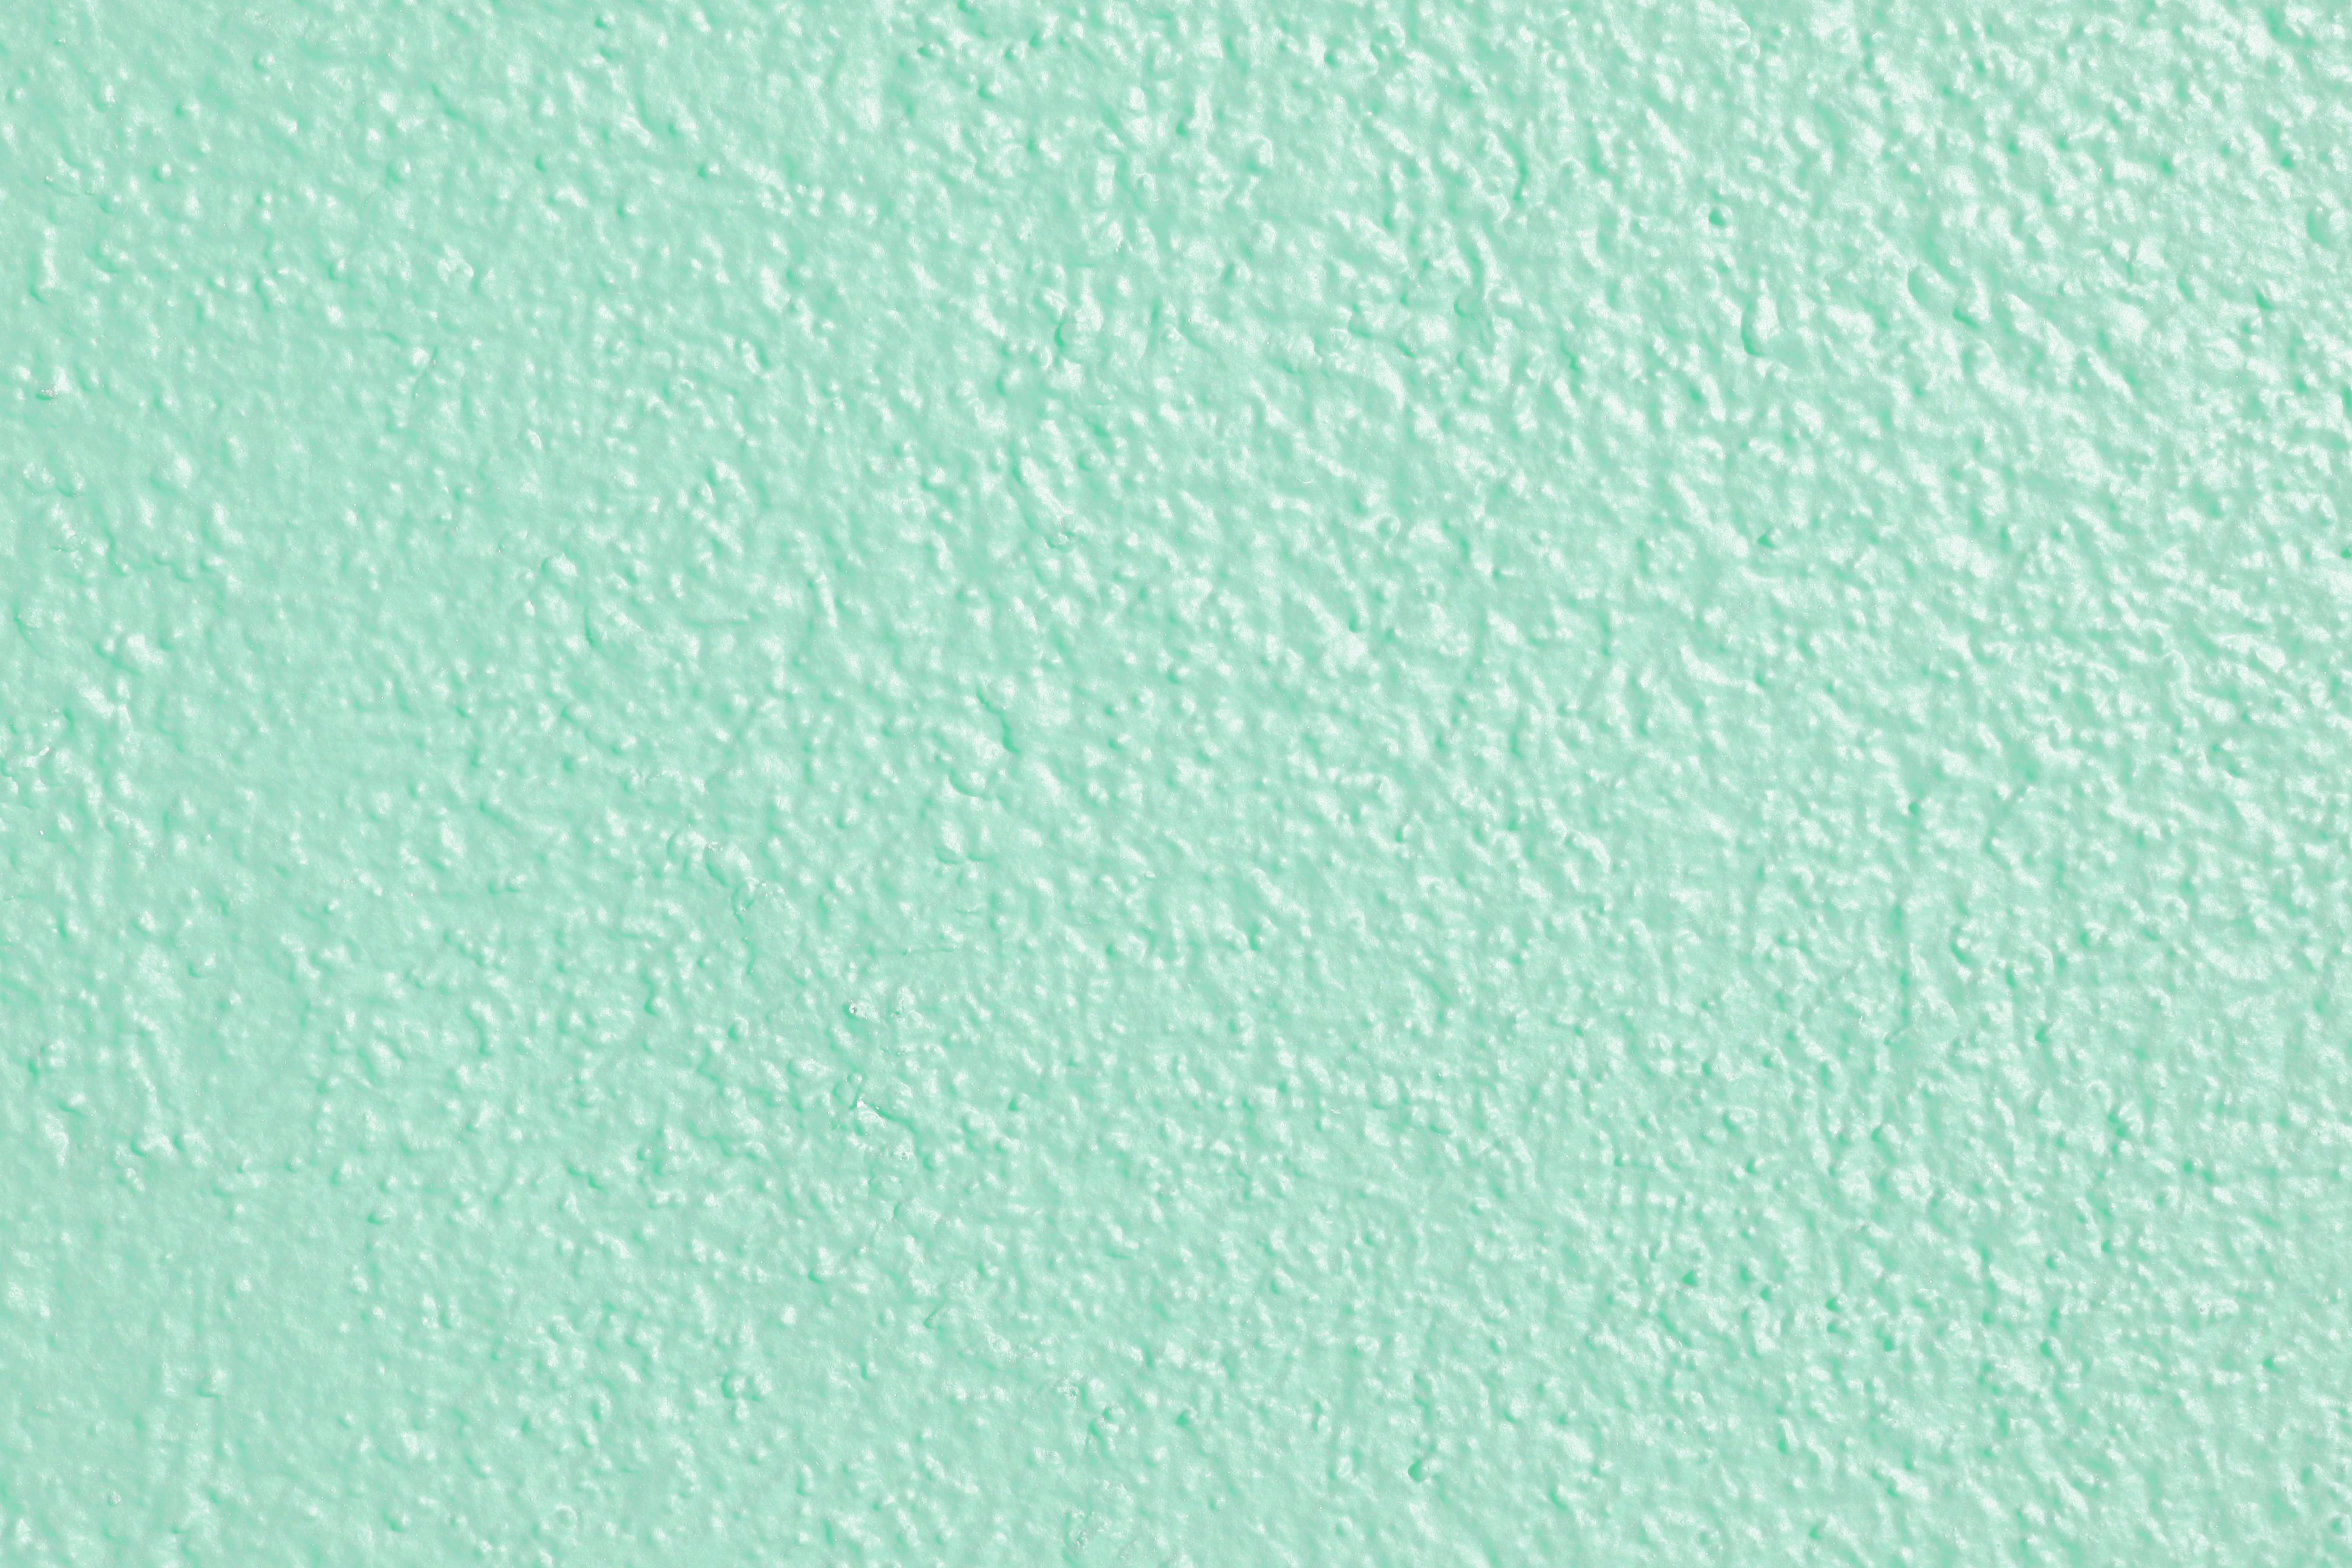 Mint Green Painted Wall Texture Picture. Free Photograph. Photo Public Domain